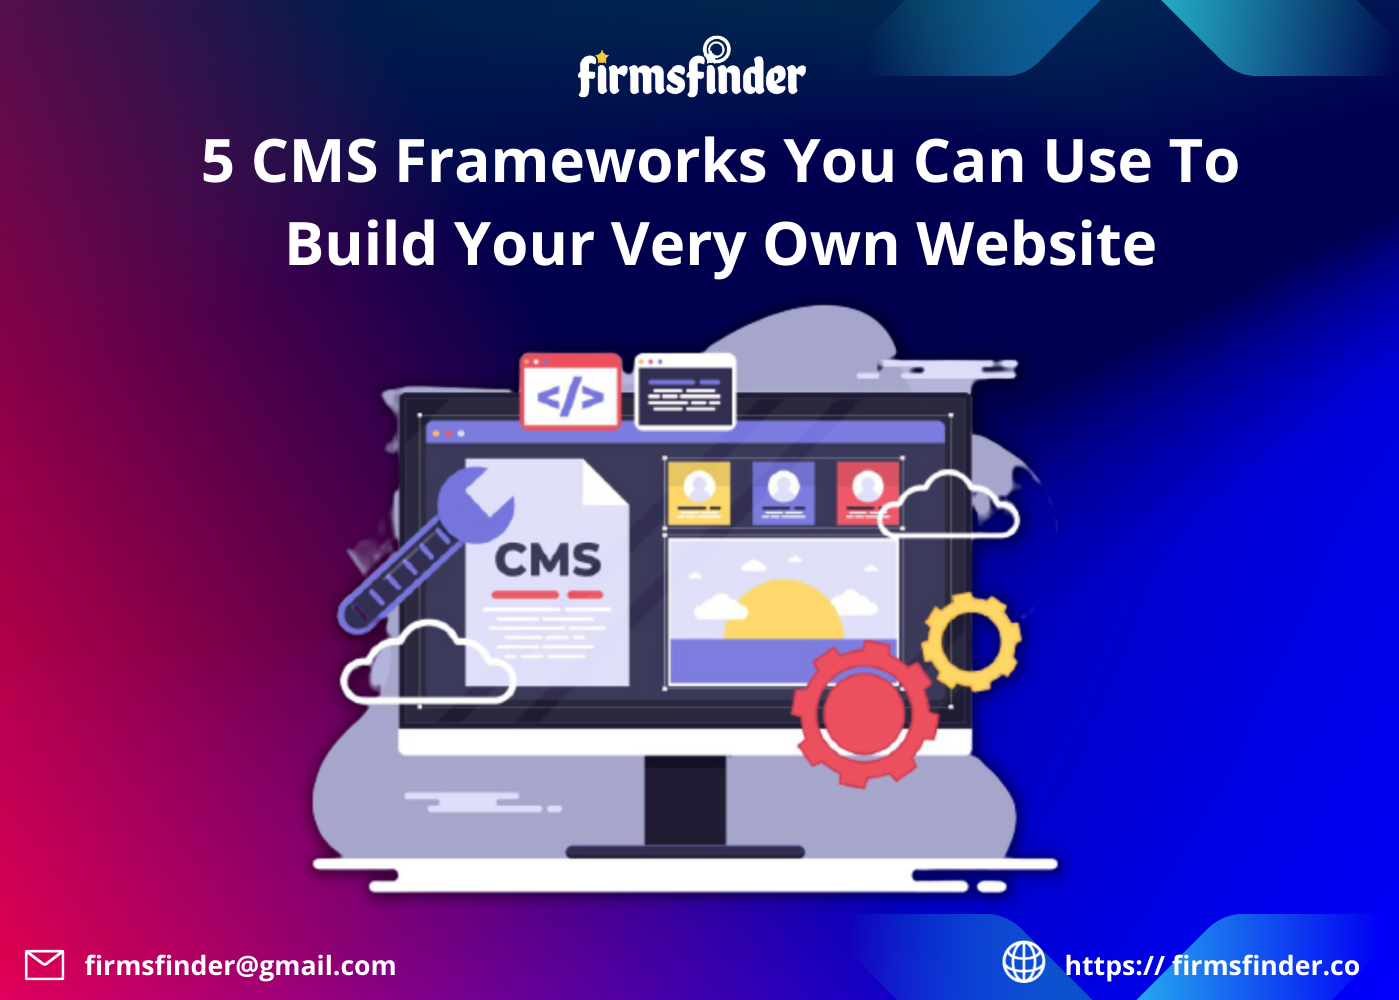 5 CMS Frameworks You Can Use To Build Your Very Own Website